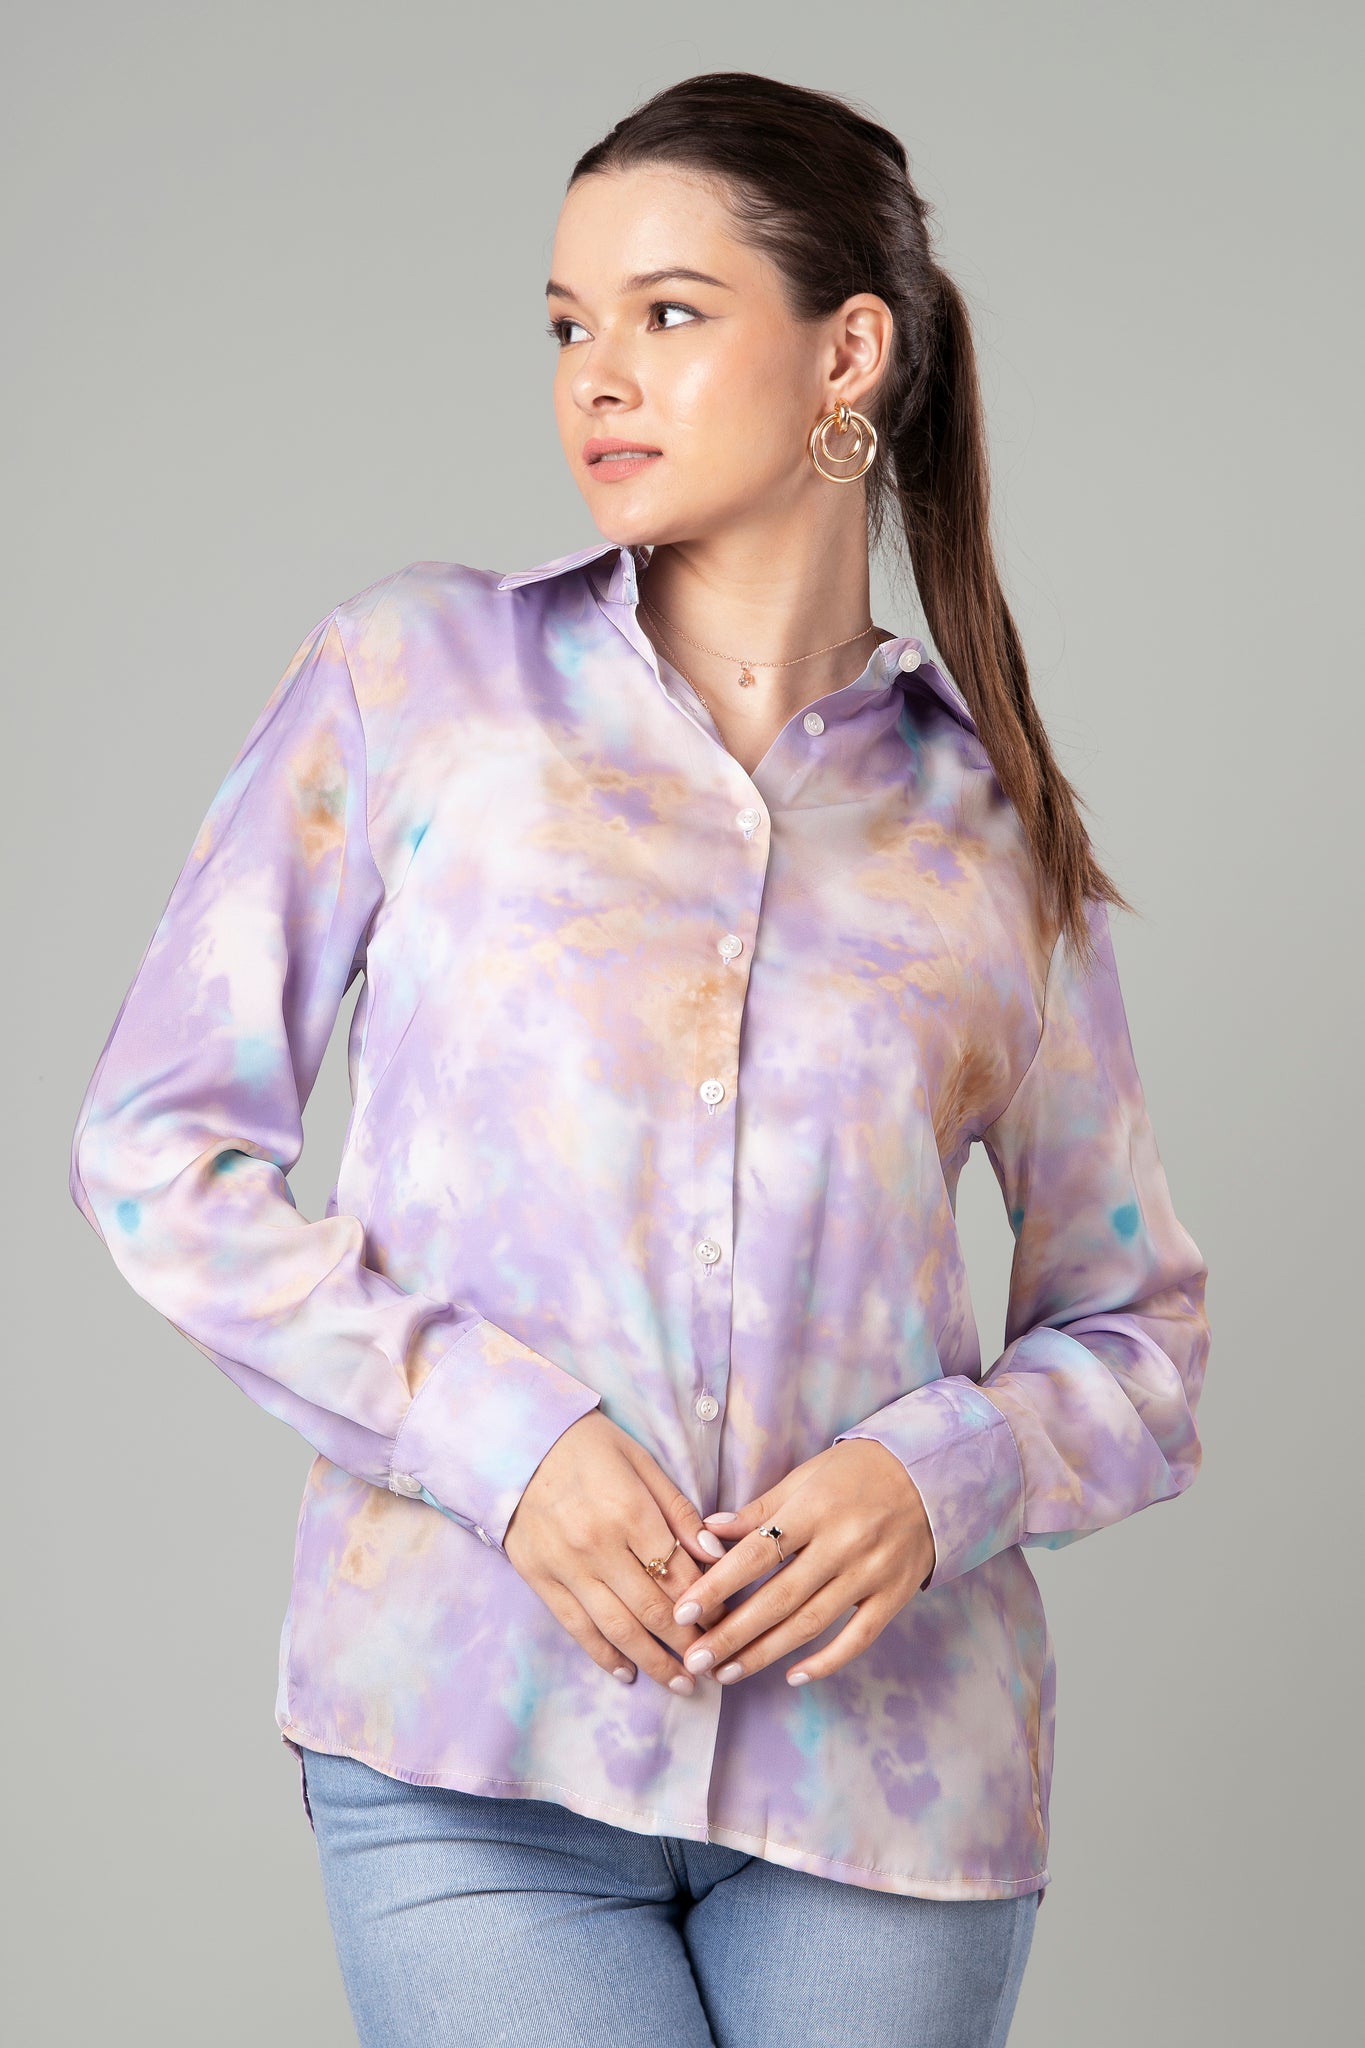 Tie And Dye Shirt For Women